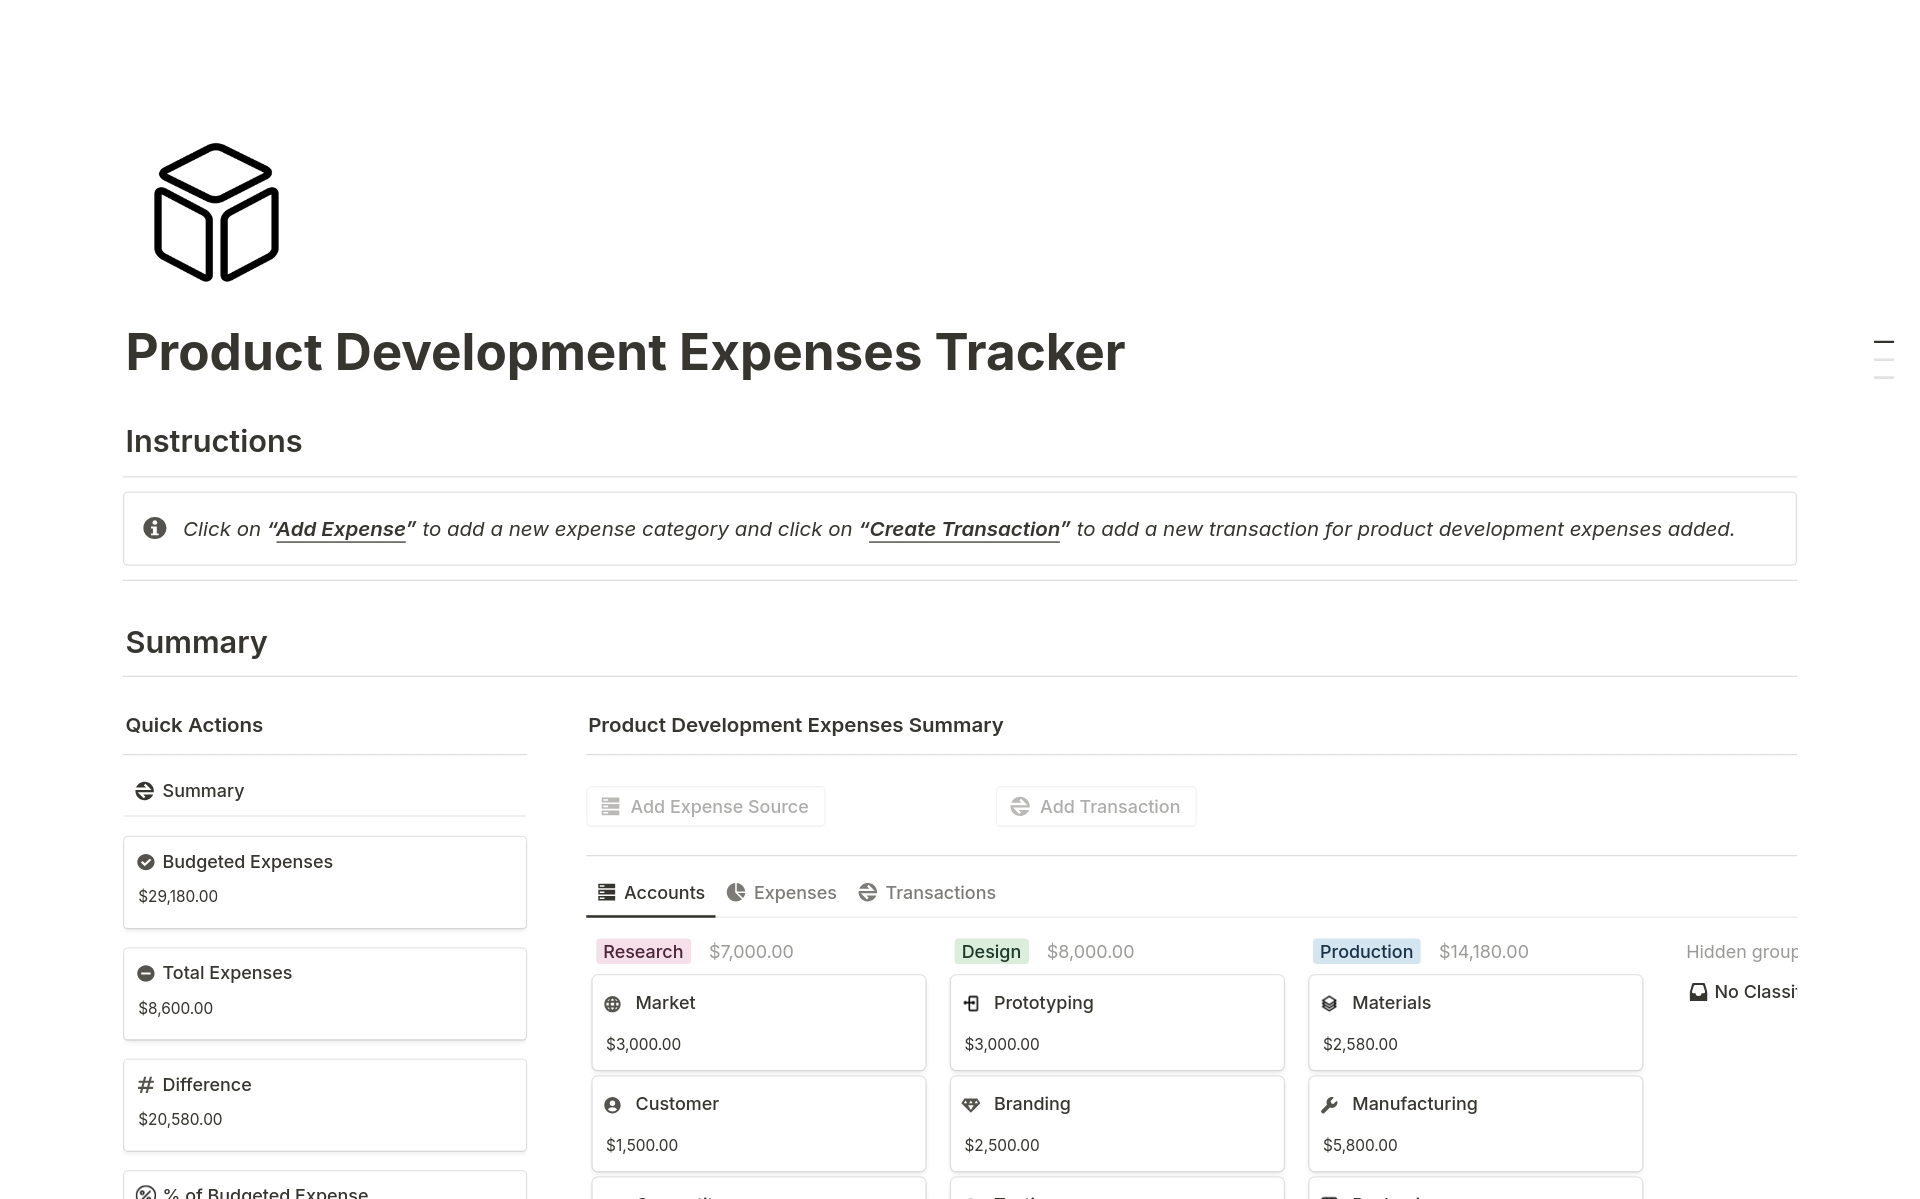 Ideal for those who are looking to manage the product development expenses of their business, this tracker helps you keep track of development expenses such as research, design, production expenses and much more.